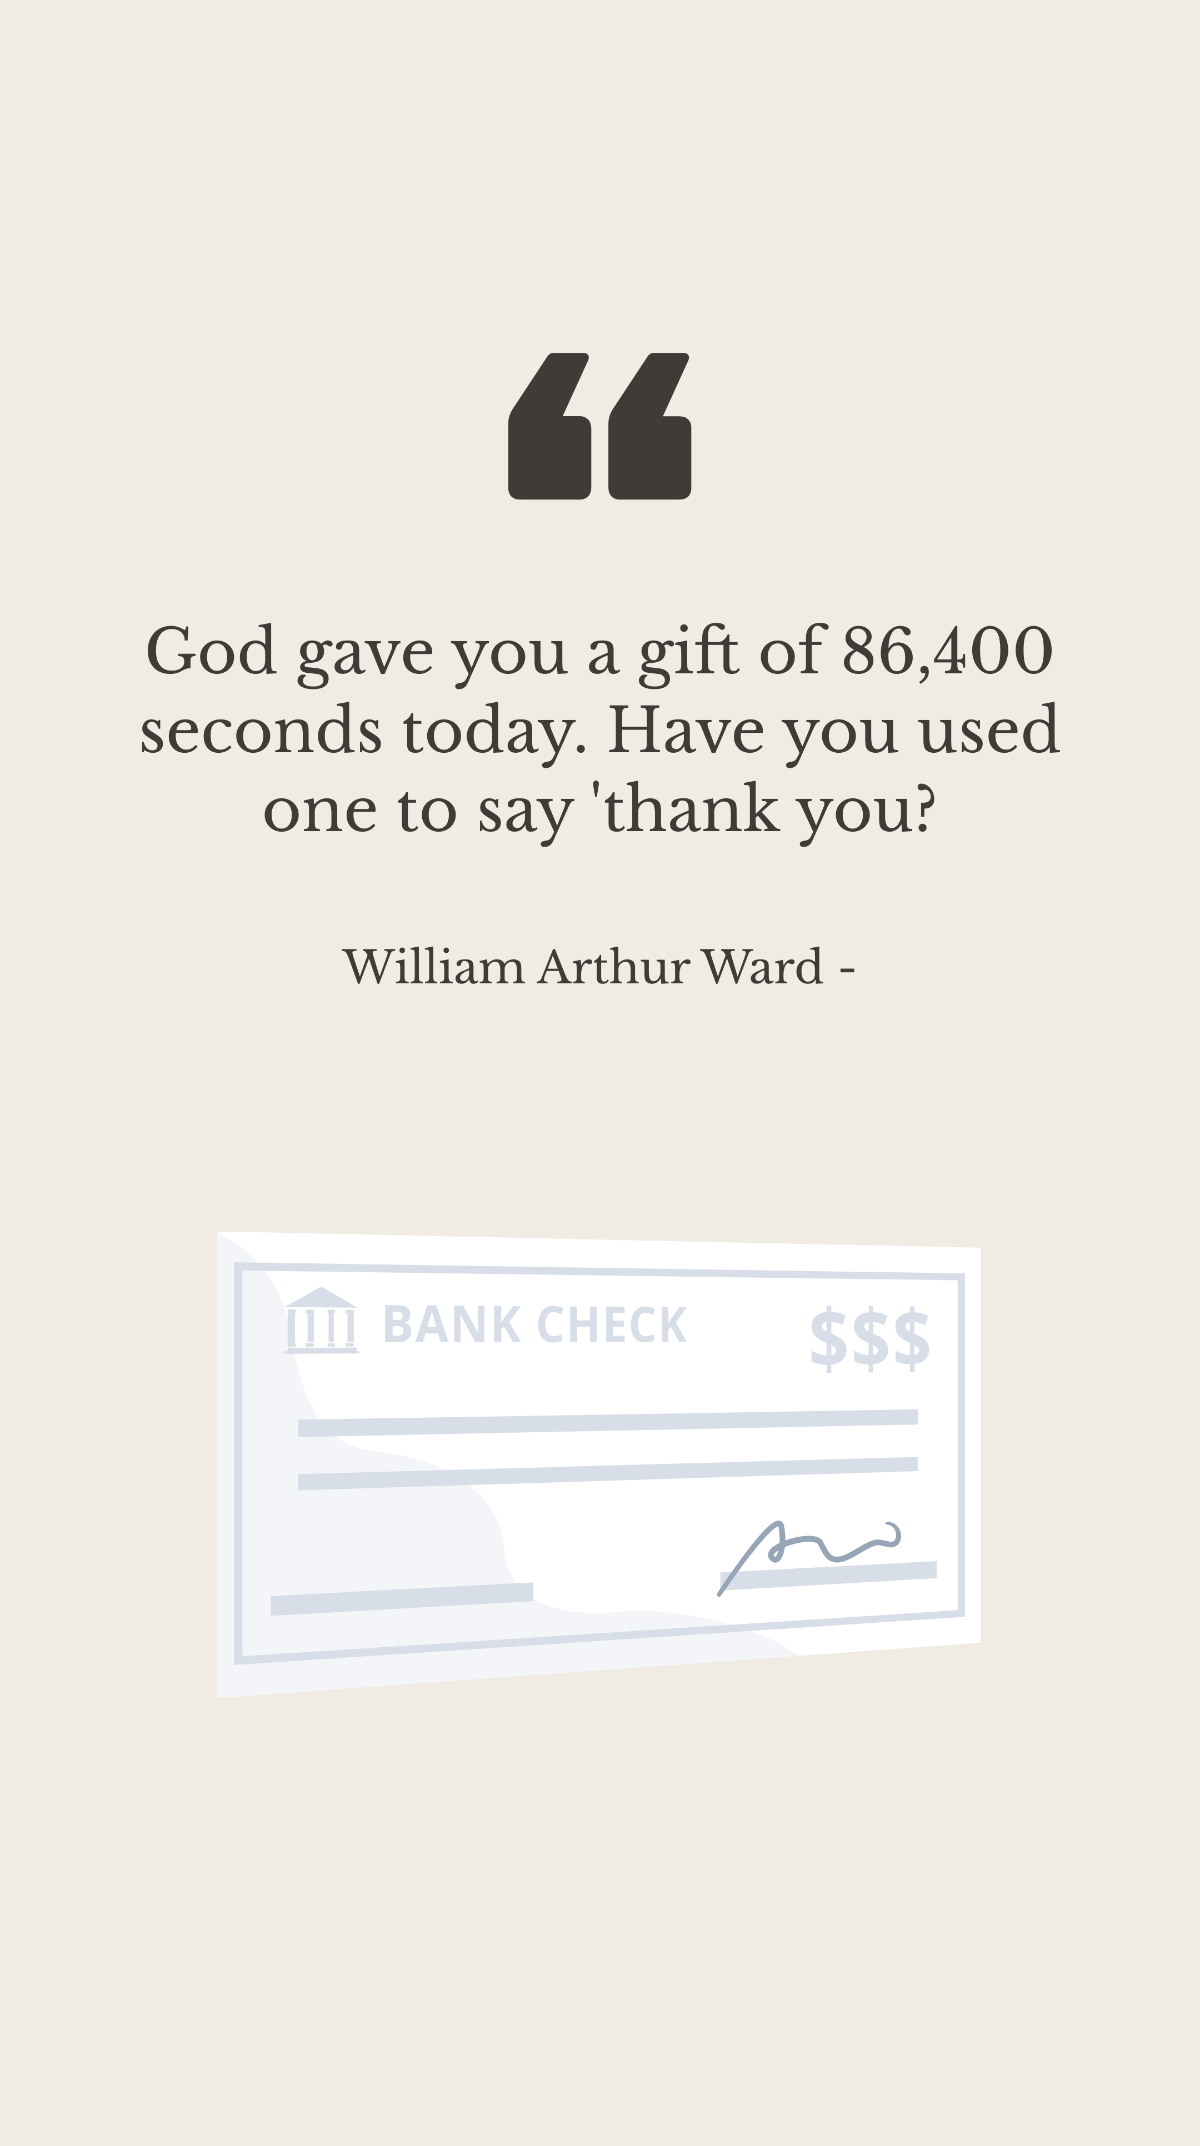 William Arthur Ward - God gave you a gift of 86,400 seconds today. Have you used one to say 'thank you? Template